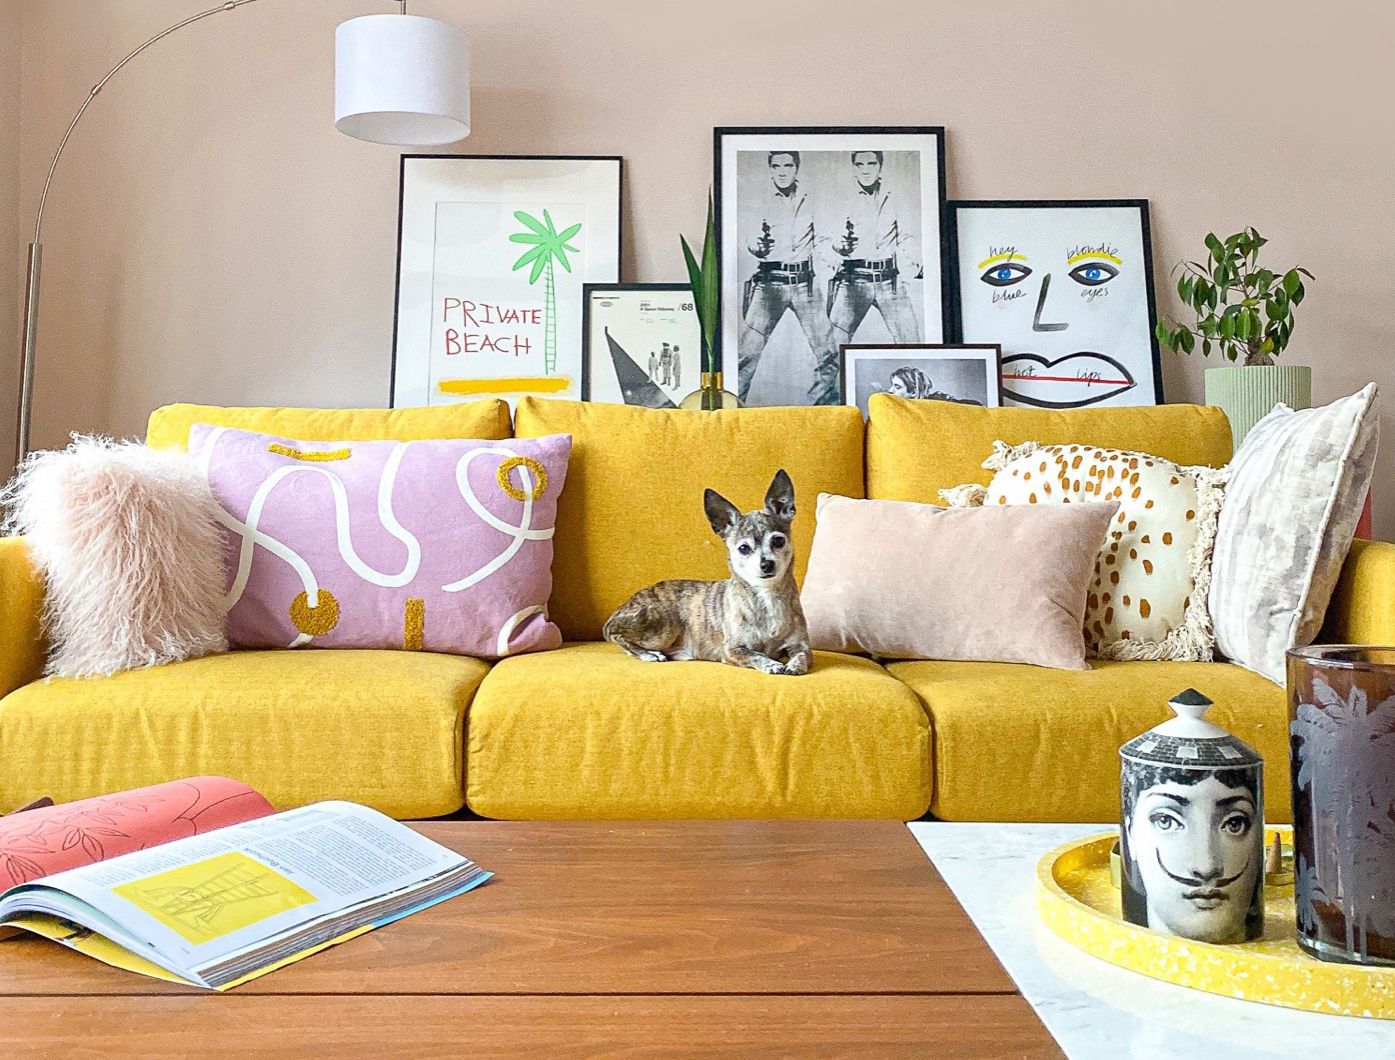 How to style your rental